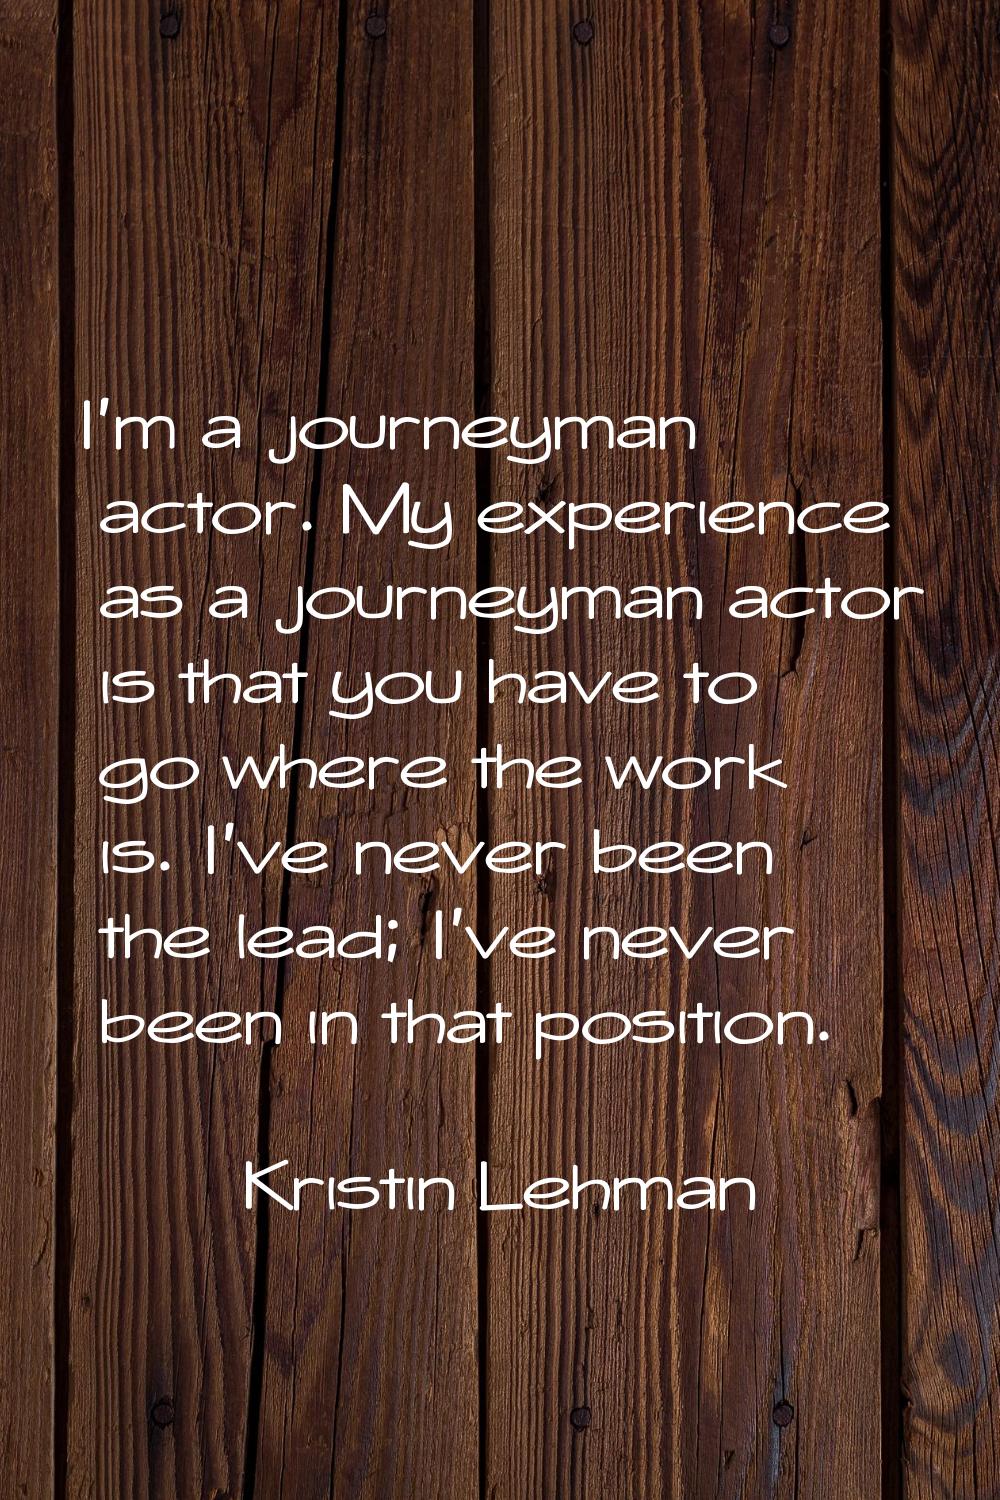 I'm a journeyman actor. My experience as a journeyman actor is that you have to go where the work i